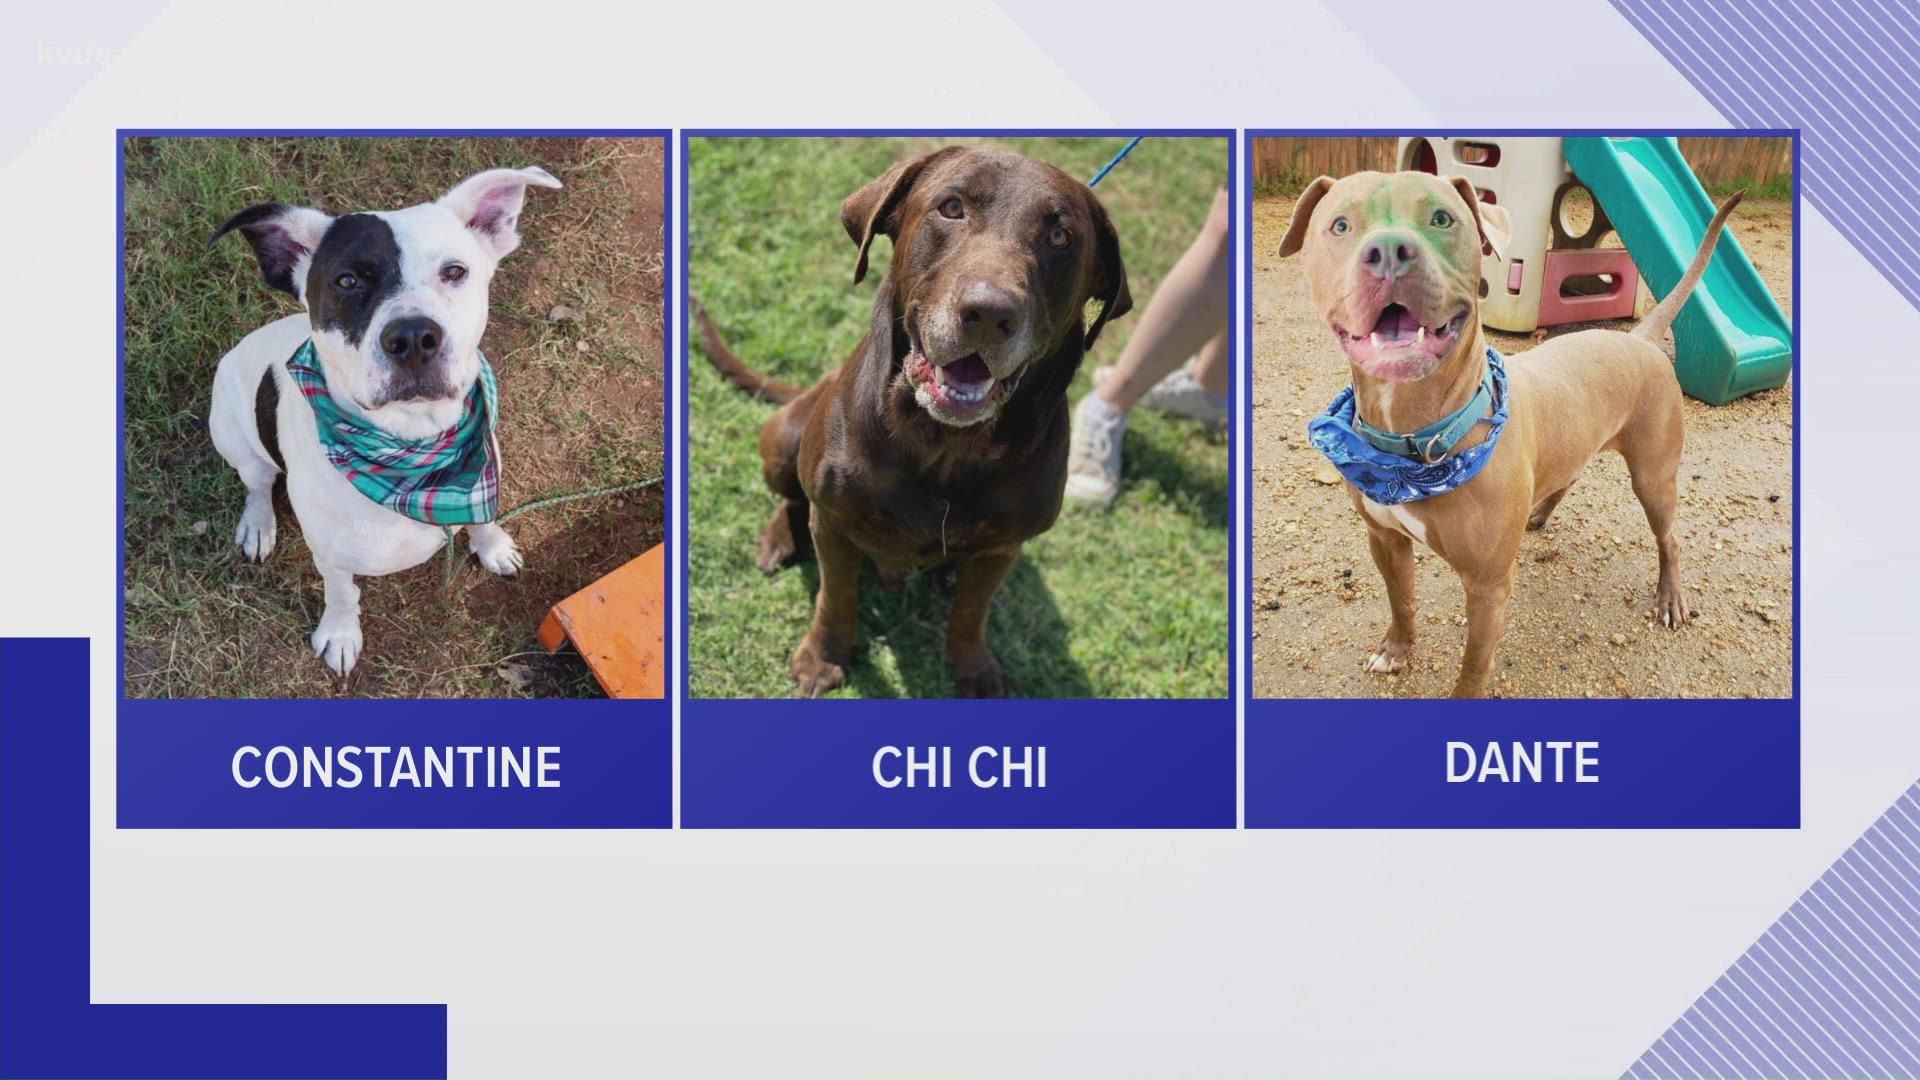 The shelter is still looking for temporary homes for about 10 dogs.